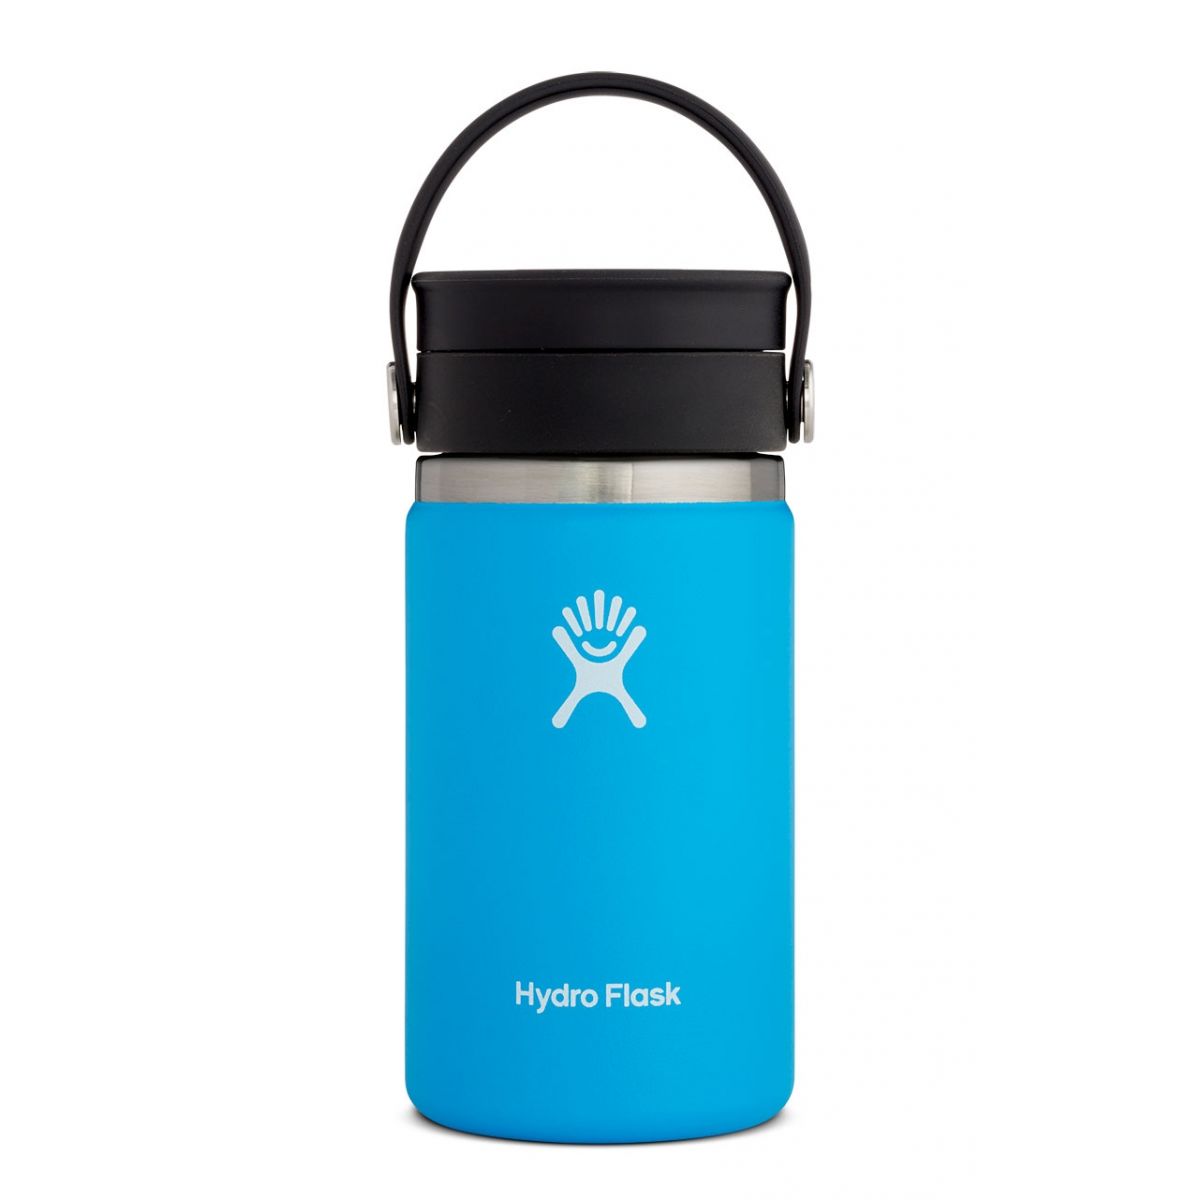 Image of Hydro Flask 12 oz Wide Mouth Coffee Flask + Flex Sip Lid - 354 ml - Pacific